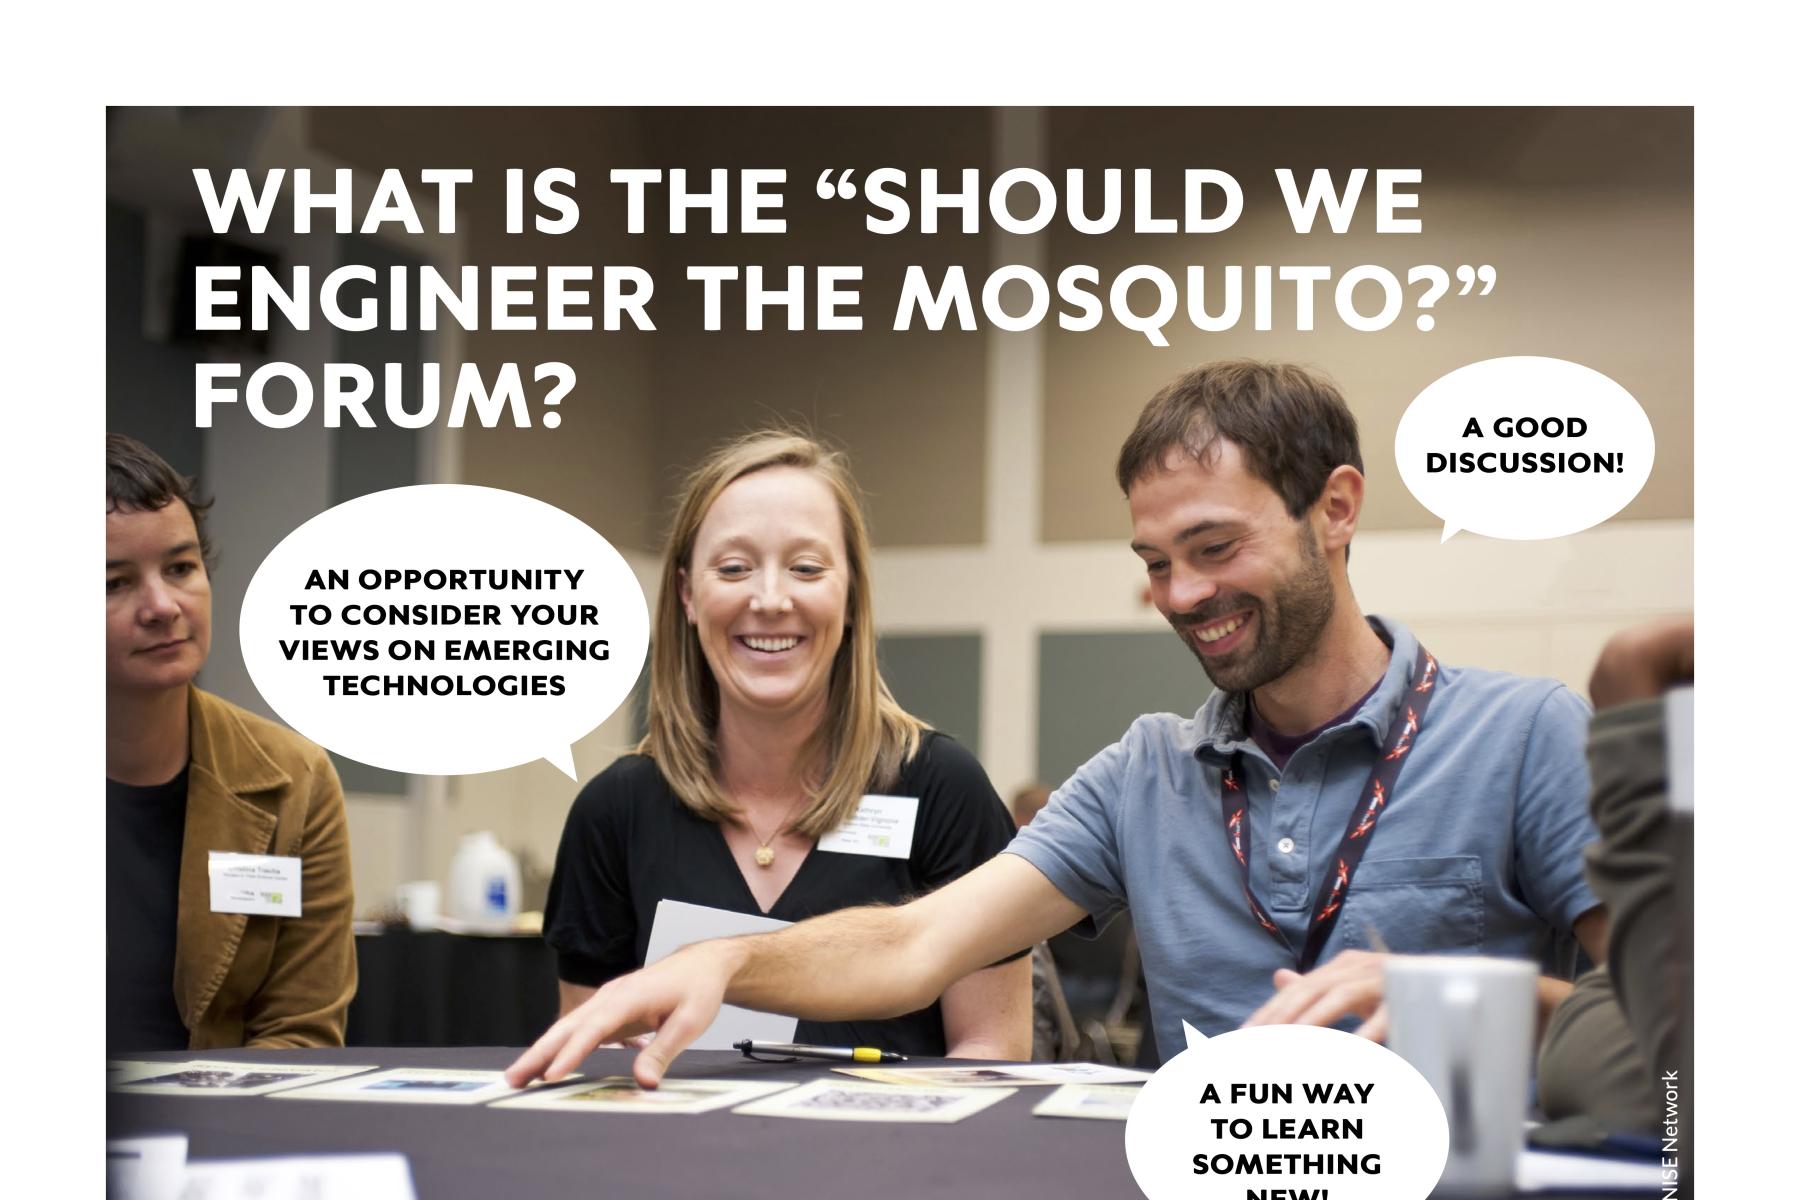 Should we engineer the mosquito promotional flyer showing people talking at a table